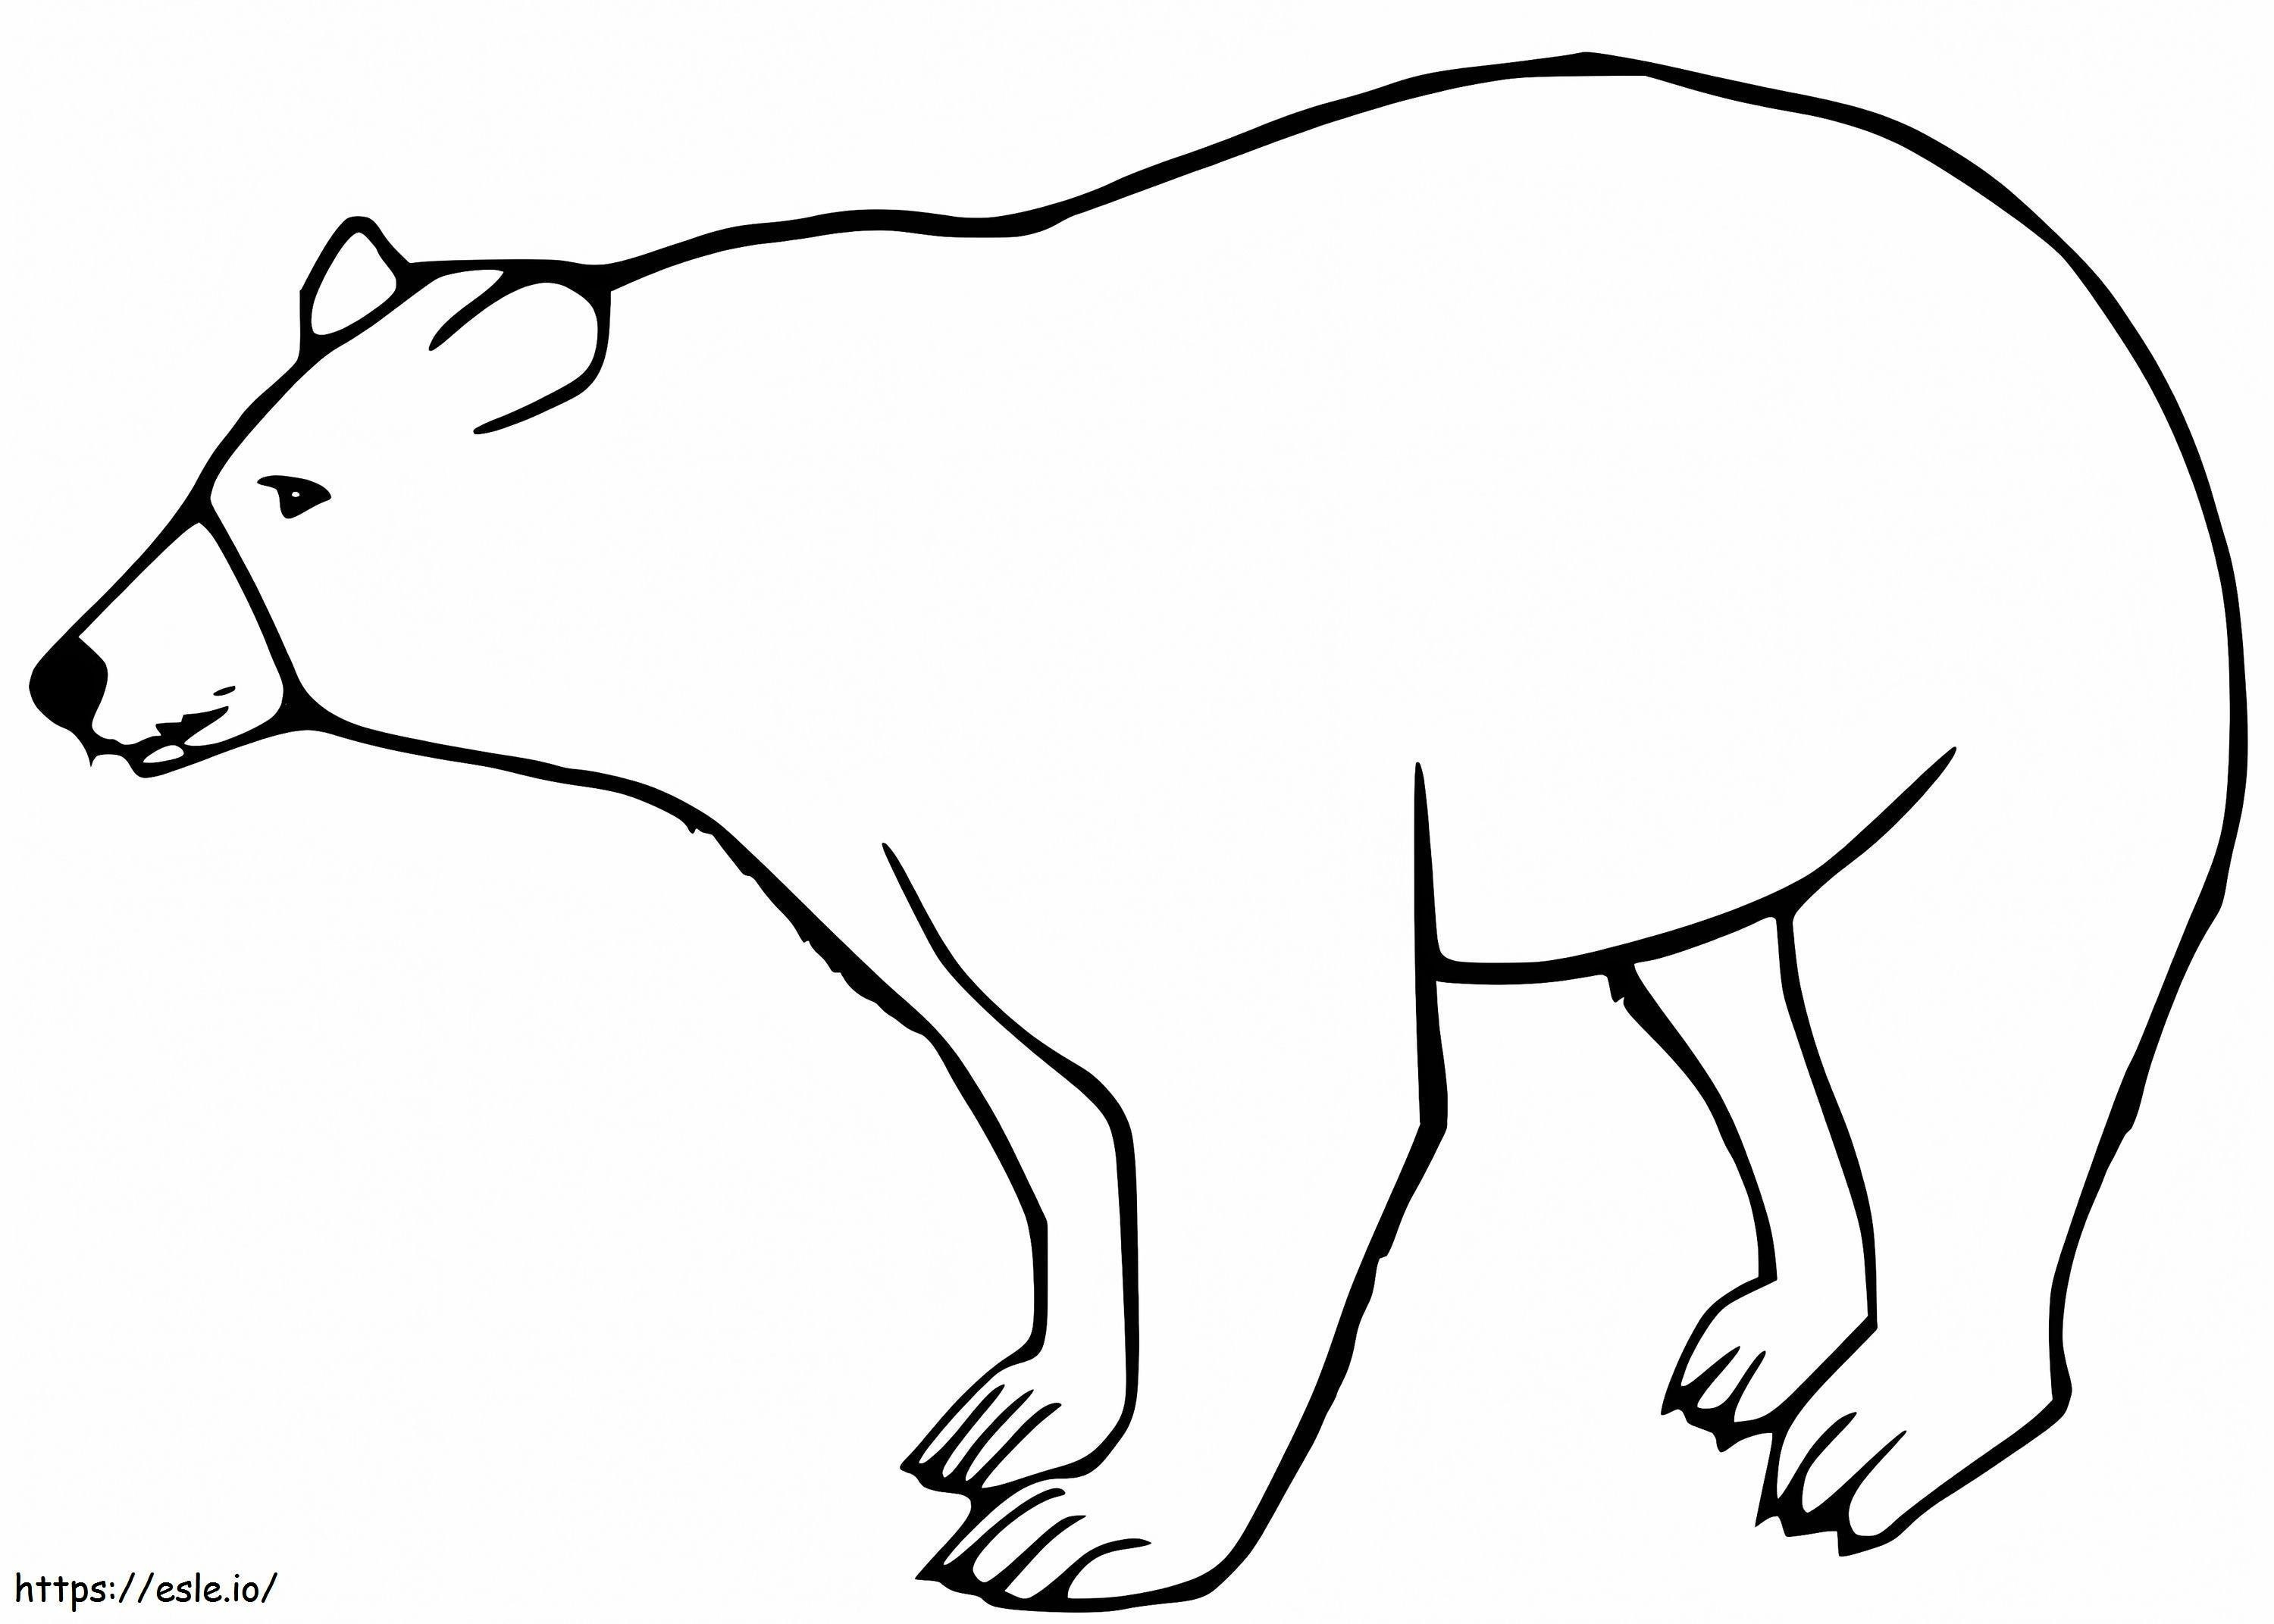 A Simple Black Bear coloring page